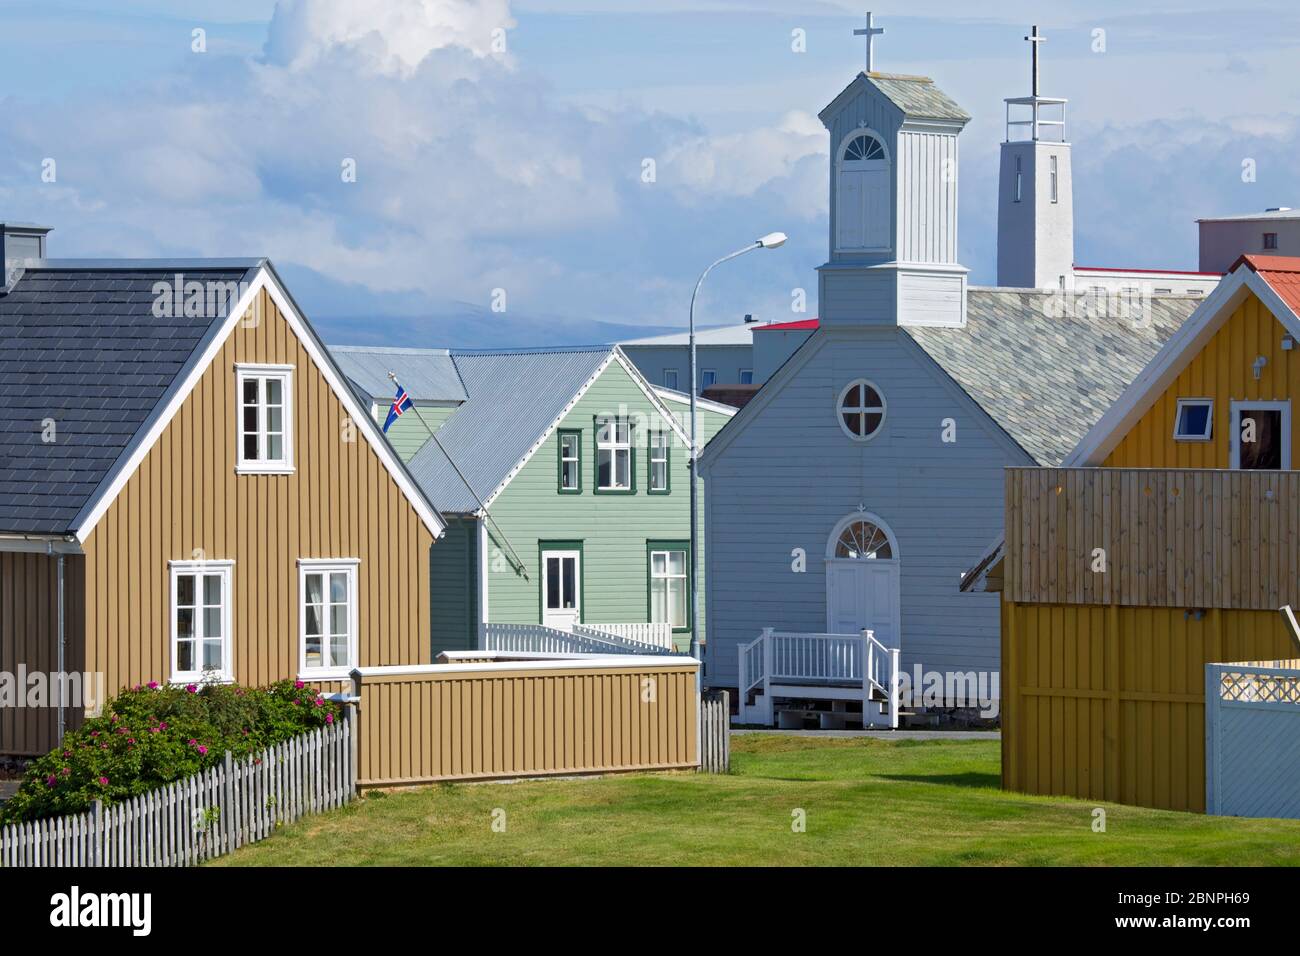 Old part of Stykkisholmur. on the left the 'Fruarhusid', a Danish trading house from 1858 and on the right the old church from 1878. Behind it is the tower of the Franciscan Hospital. Stock Photo